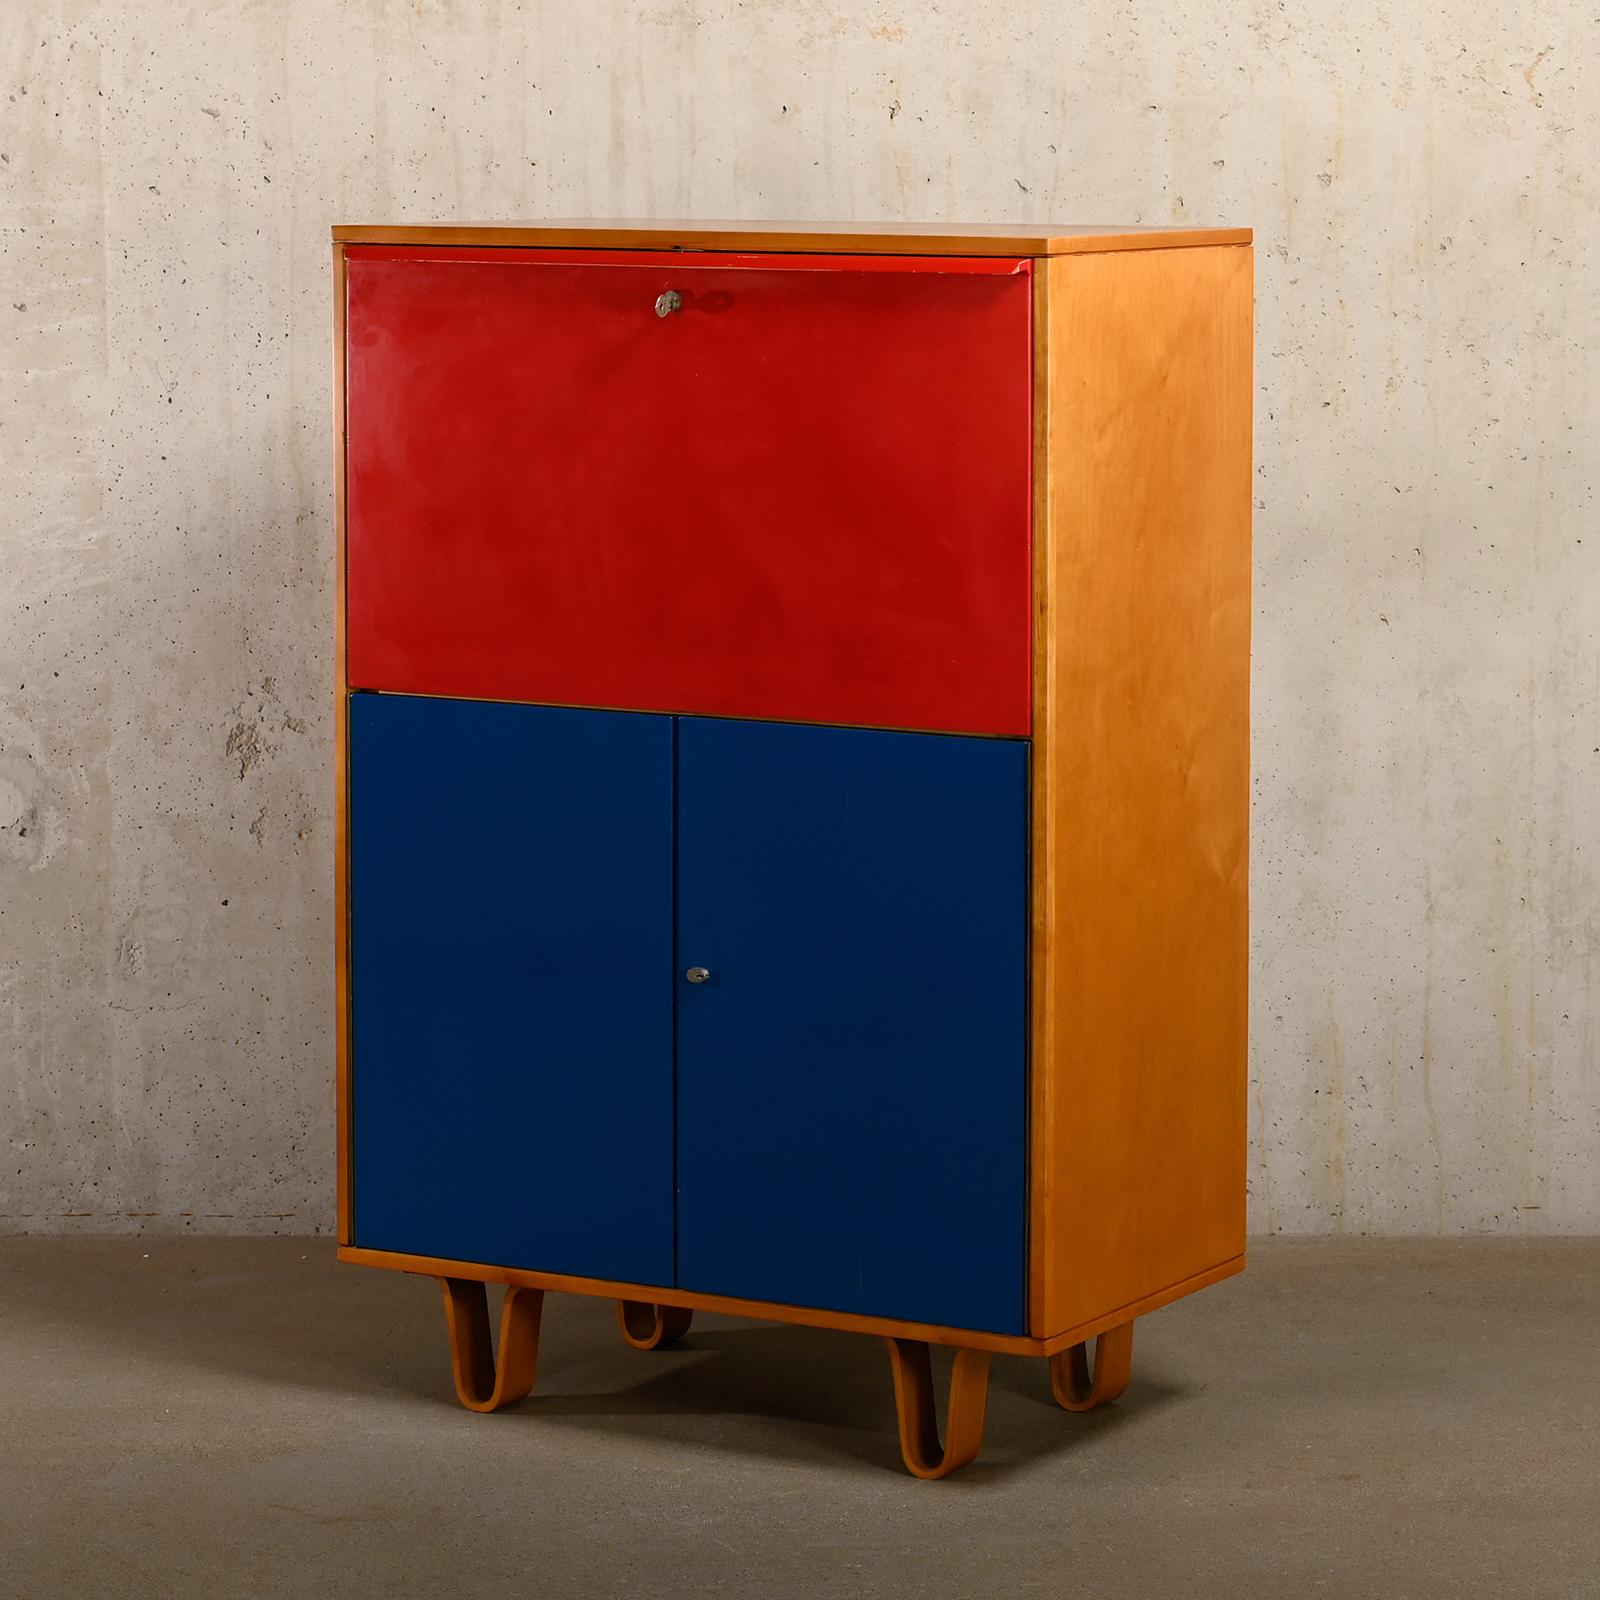 Cees Braakman CB07 Secretaire in Birch red / blue plywood for Pastoe Netherlands For Sale 2